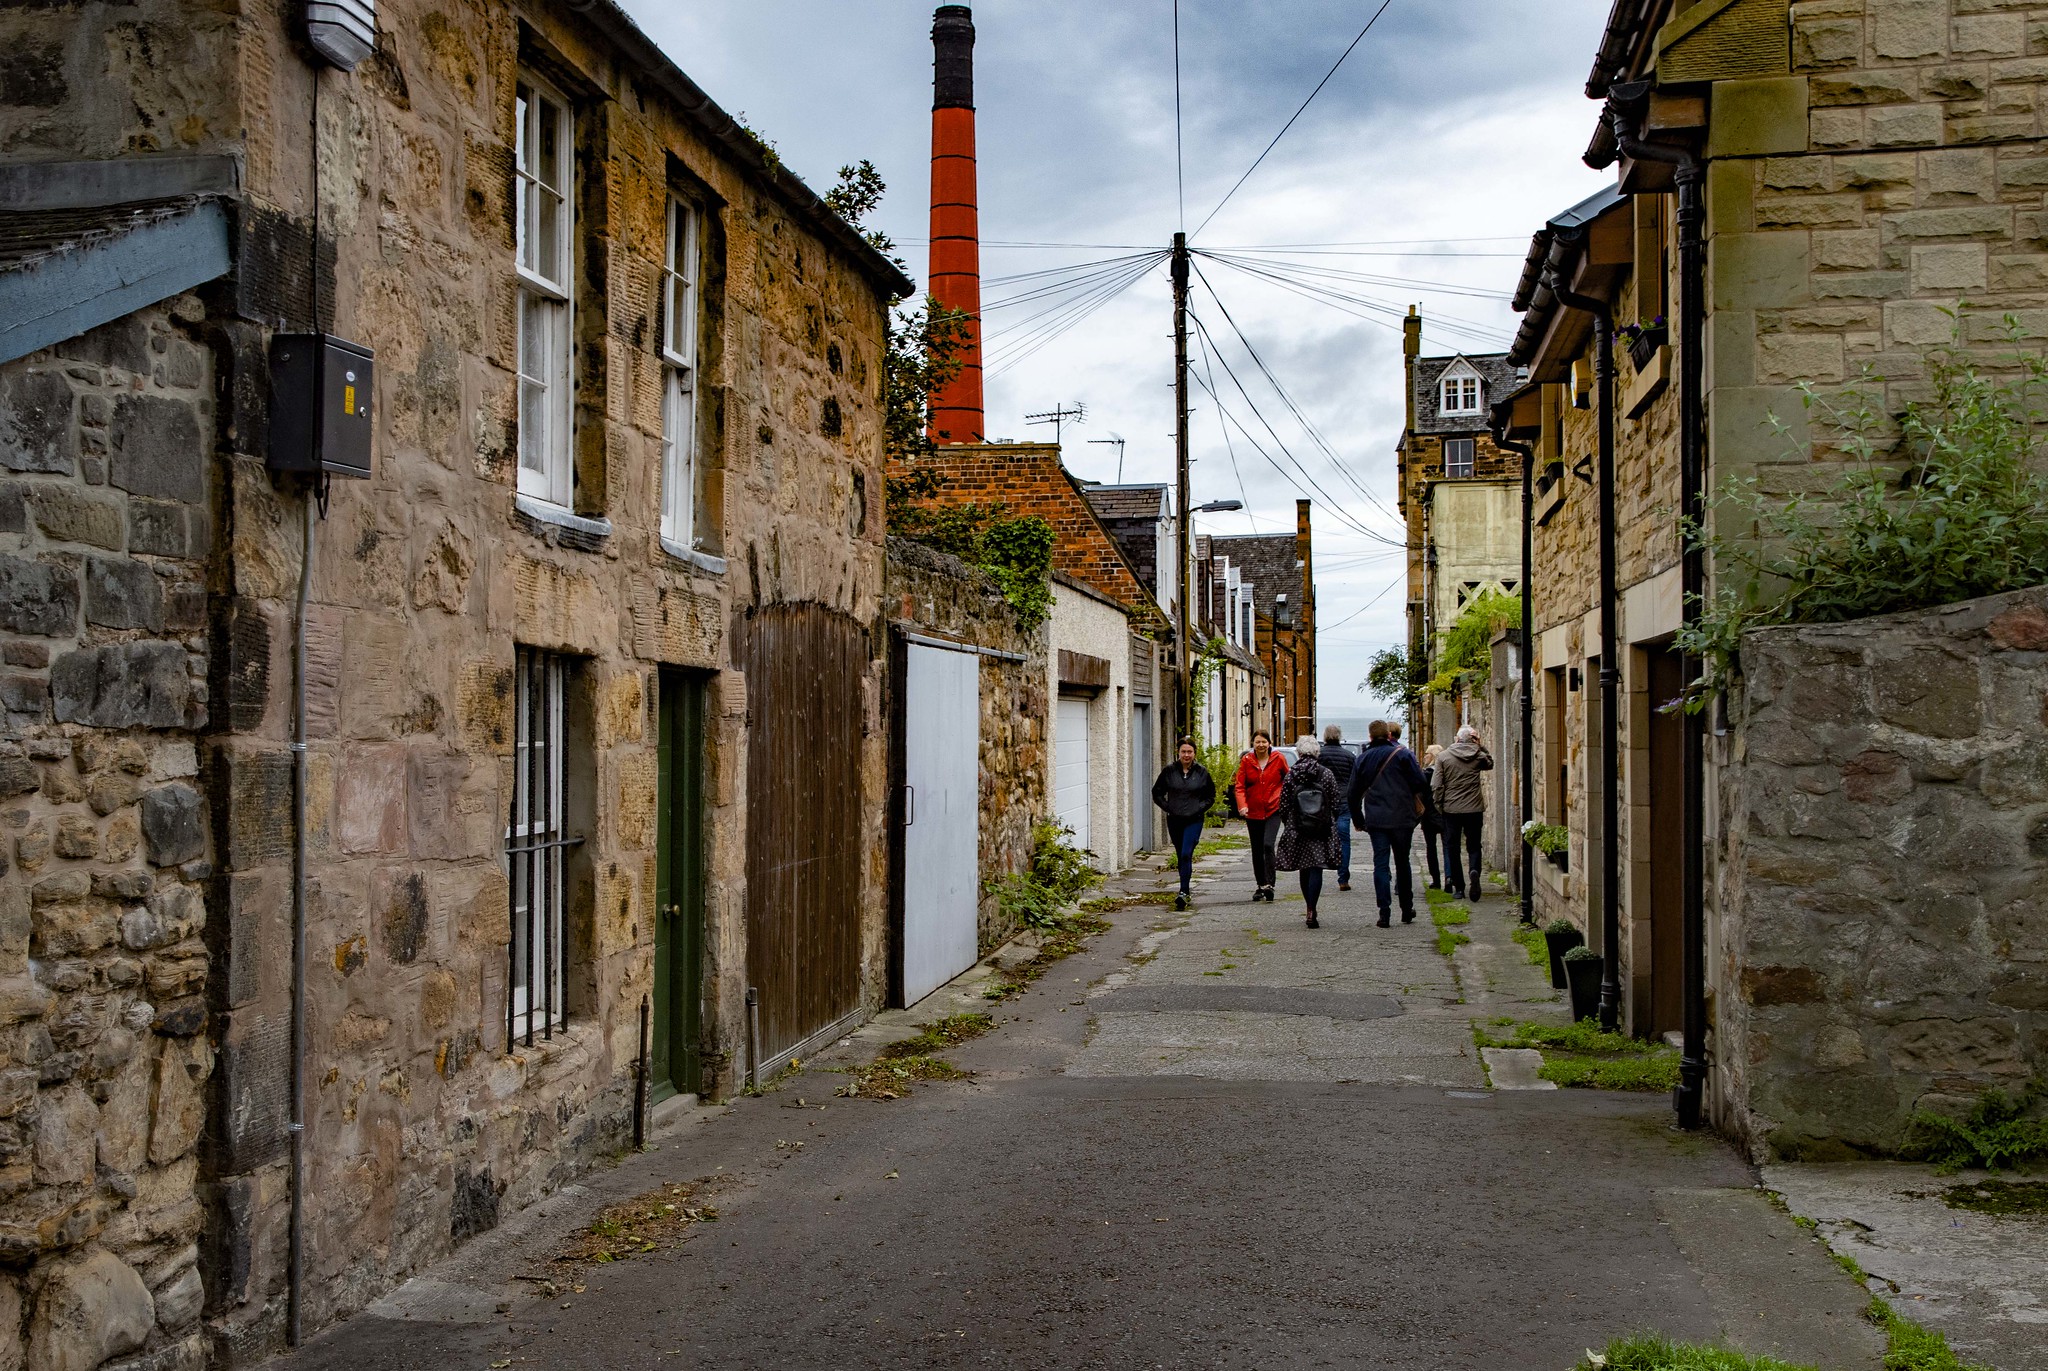 A group of adults walk along a narrow, carless street between some old buildings